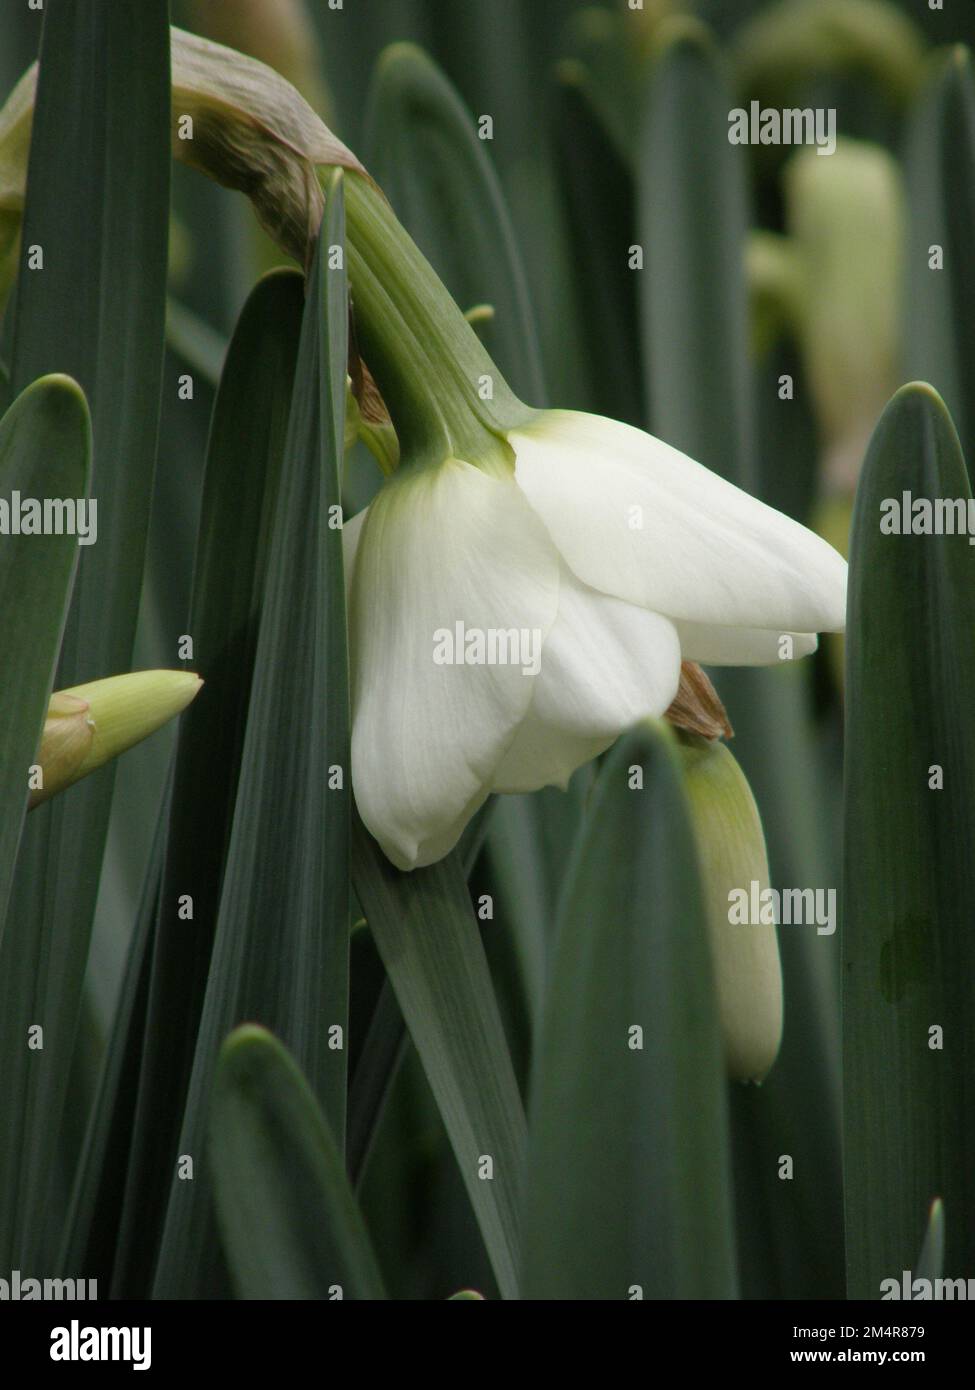 White Small-Cupped daffodils (Narcissus) Park Springs bloom in a garden in March Stock Photo